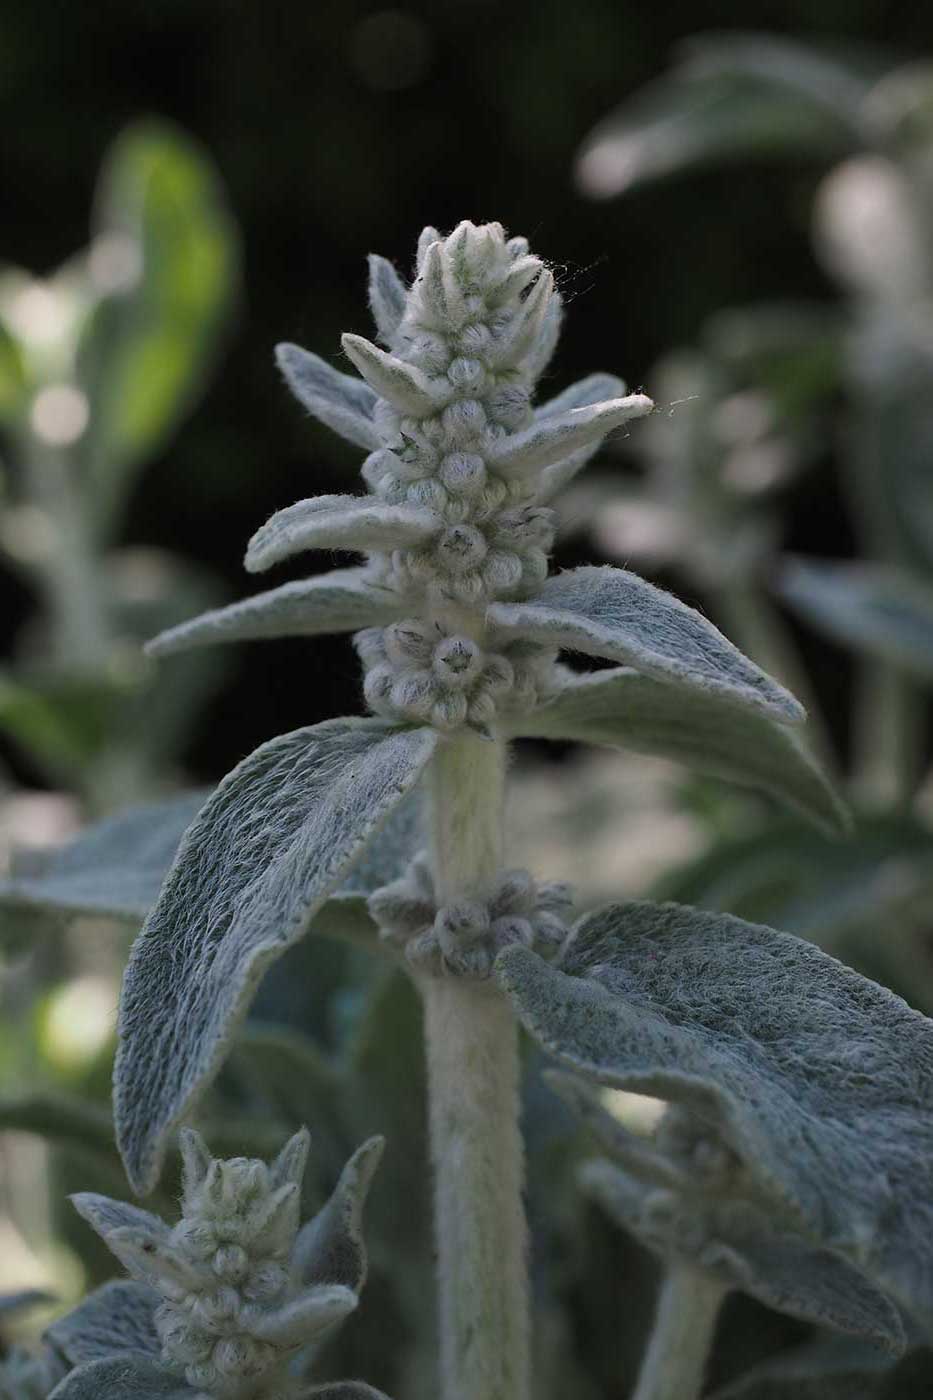 Not only is lamb's ear hardy, tolerating a multitude of soil and sun conditions, but it sends up spikes of purple flowers in late spring and early summer that attract bees like crazy. Plant it, and its nectar will attract not only bees, but hummingbirds, as well.